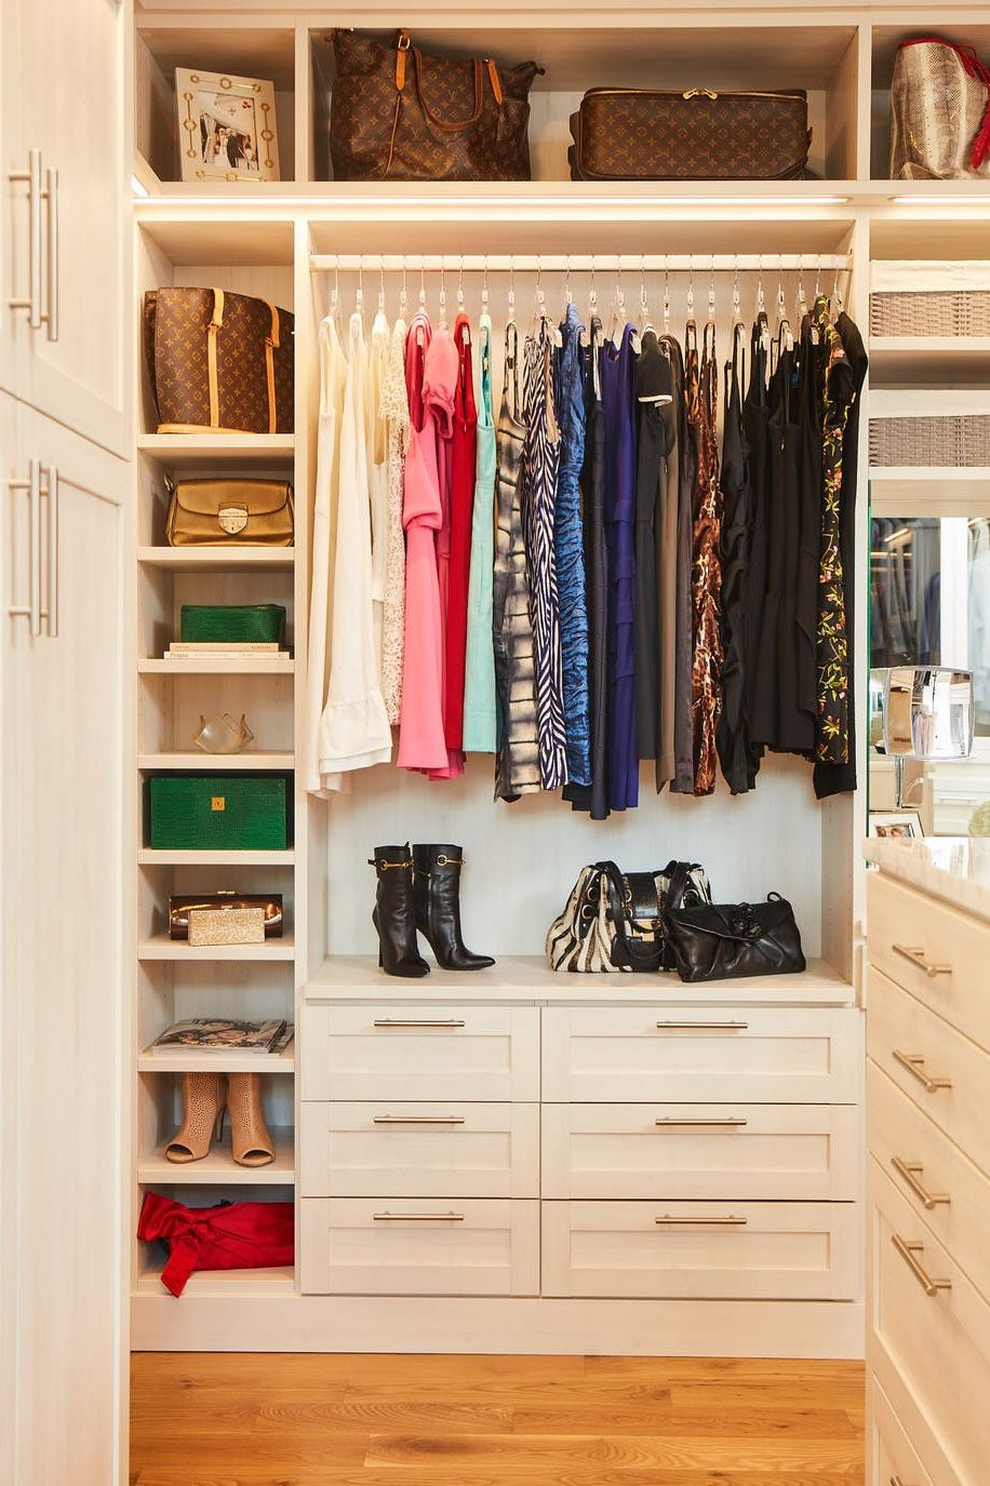 15 ideas to save space for small wardrobe - 8